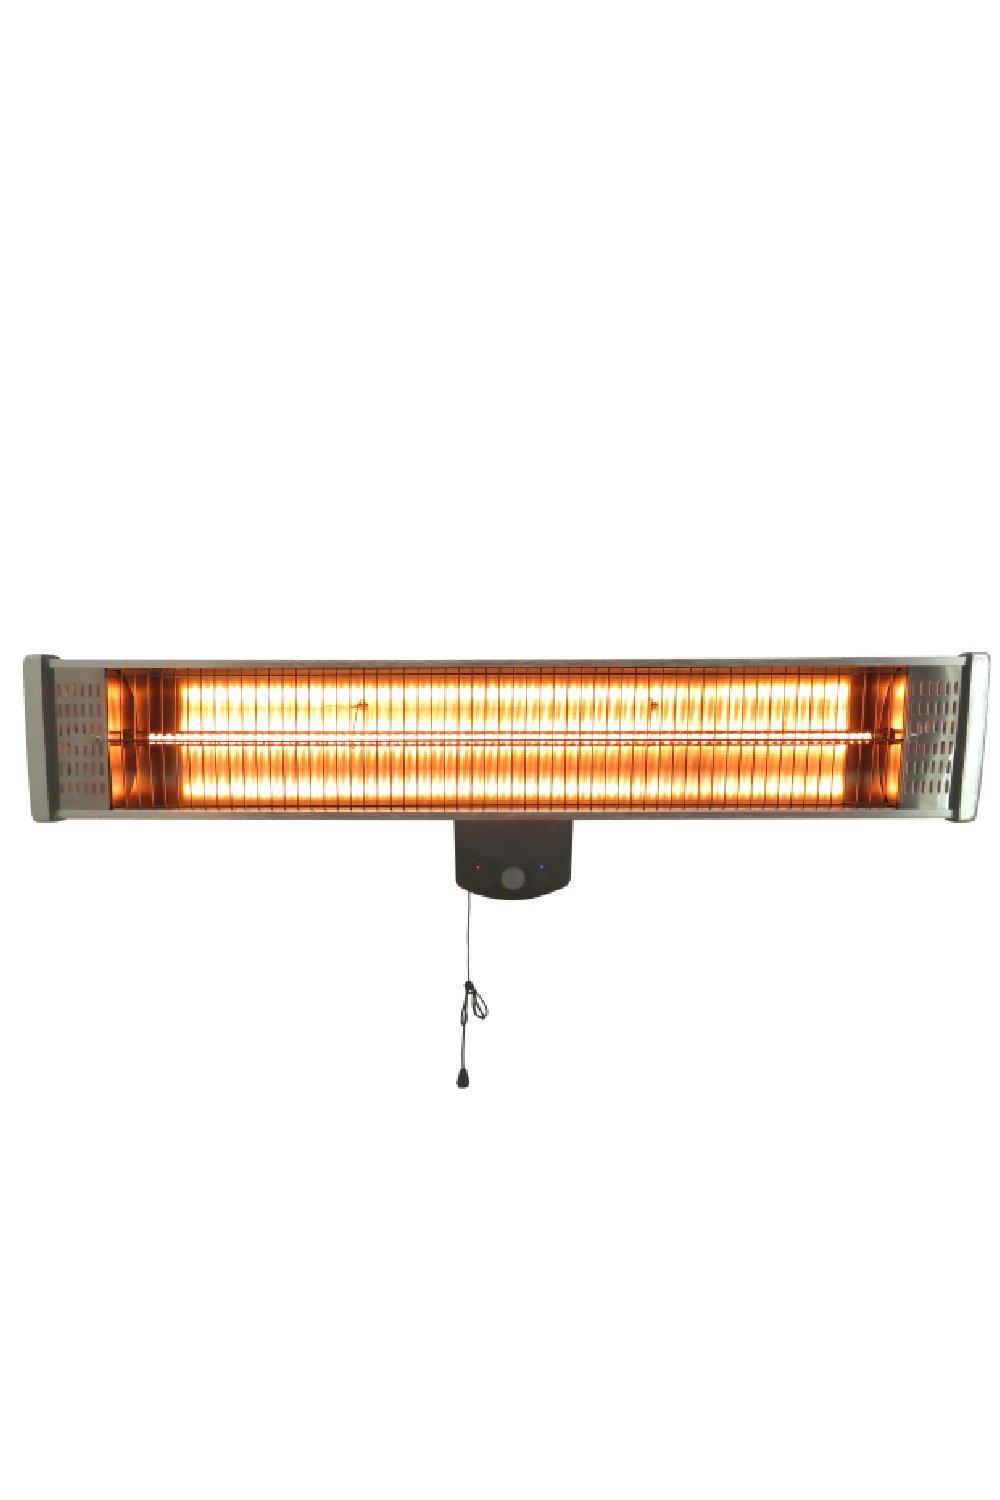 Zurich 1500w Wall Mounted Outdoor Electric Patio Heater